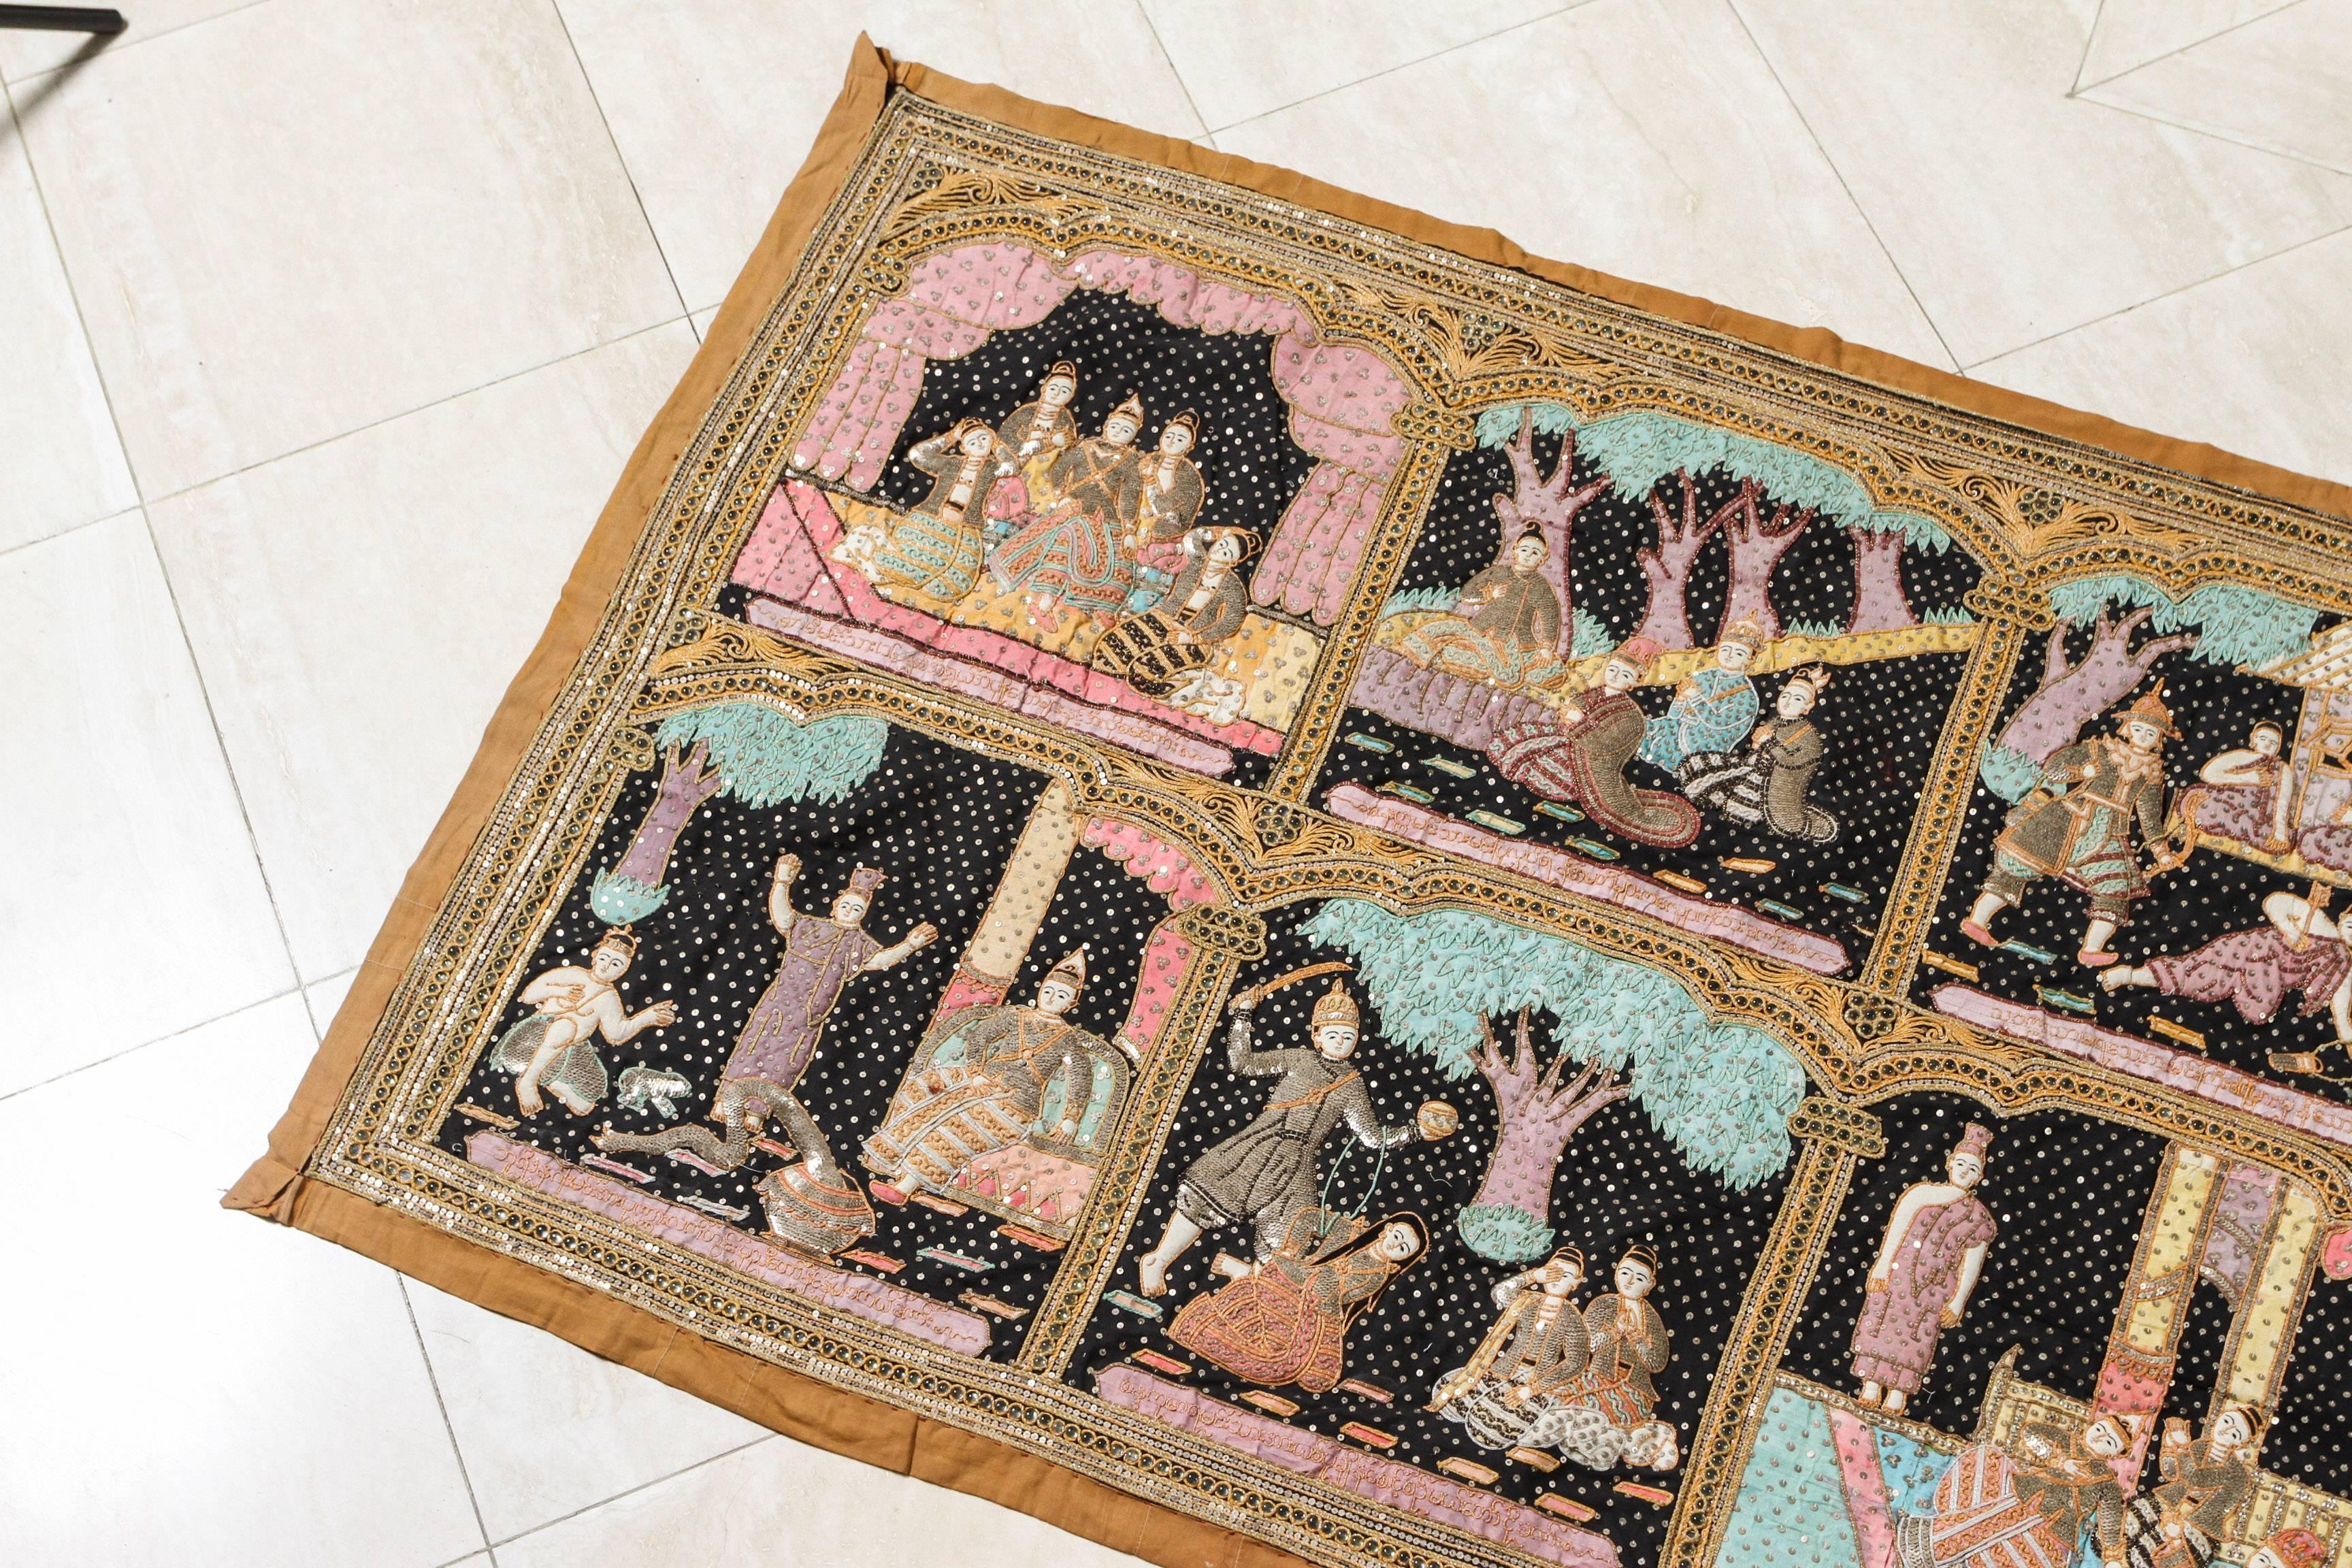 Fabulous large Kakaga Burmese bead embroidered adorned with sequins and beads tapestry wall hanging .
This vintage handcrafted needlework wall hanging tapestry shows ten different scenes from the ancient epic Hindu poem, the Ramayana, or from